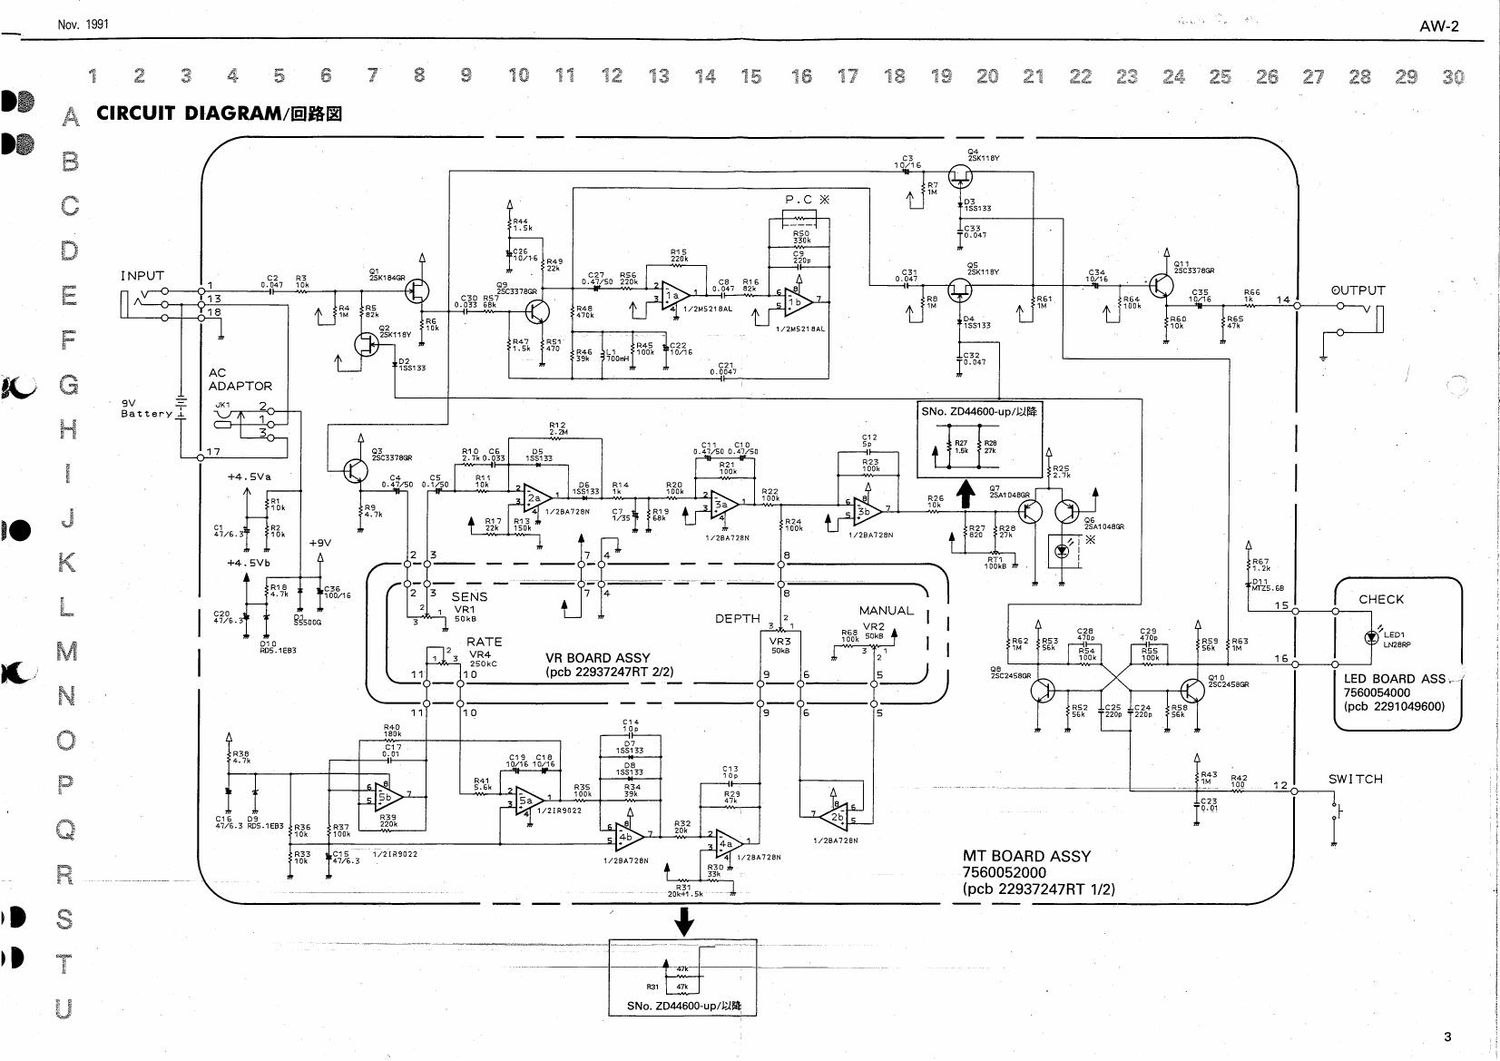 Boss AW 2 Auto Wah Schematic